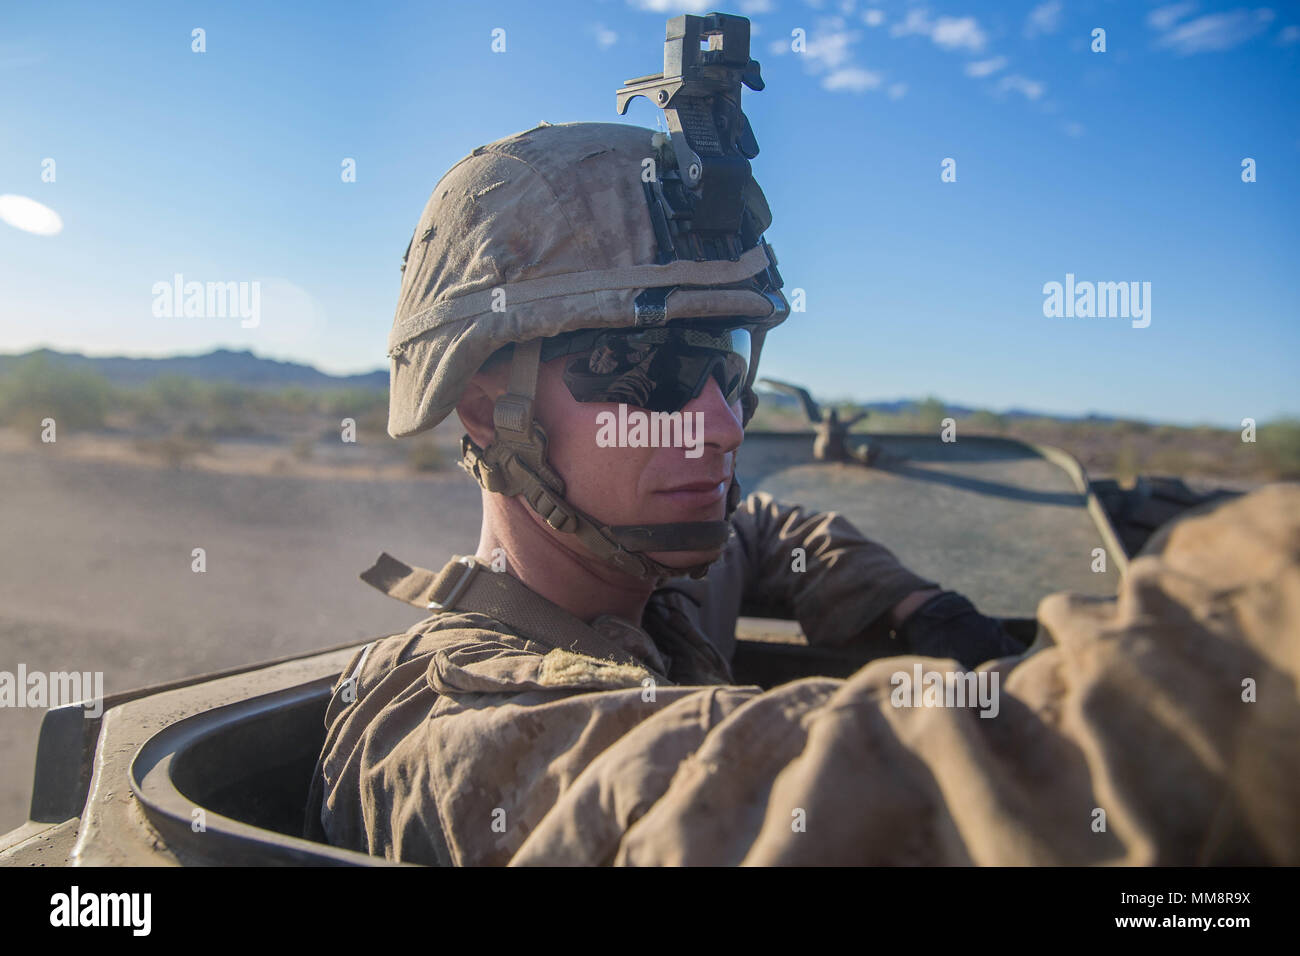 U.S. Marine Corps Cpl. Samuel Cappadona, a light armored vehicle (LAV) technician with 1st Light Armored Reconnaissance (LAR) Battalion, 1st Marine Division, stands inside an LAV during exercise Deep Strike II at River Valley, Calif., Sept. 13, 2017. Deep Strike II consisted of 1st LAR conducting long range maneuvers to simulate real world scenarios outside of the normal training area of Marine Corps Base Camp Pendleton. (U.S. Marine Corps photo by Lance Cpl. Roxanna Gonzalez) Stock Photo